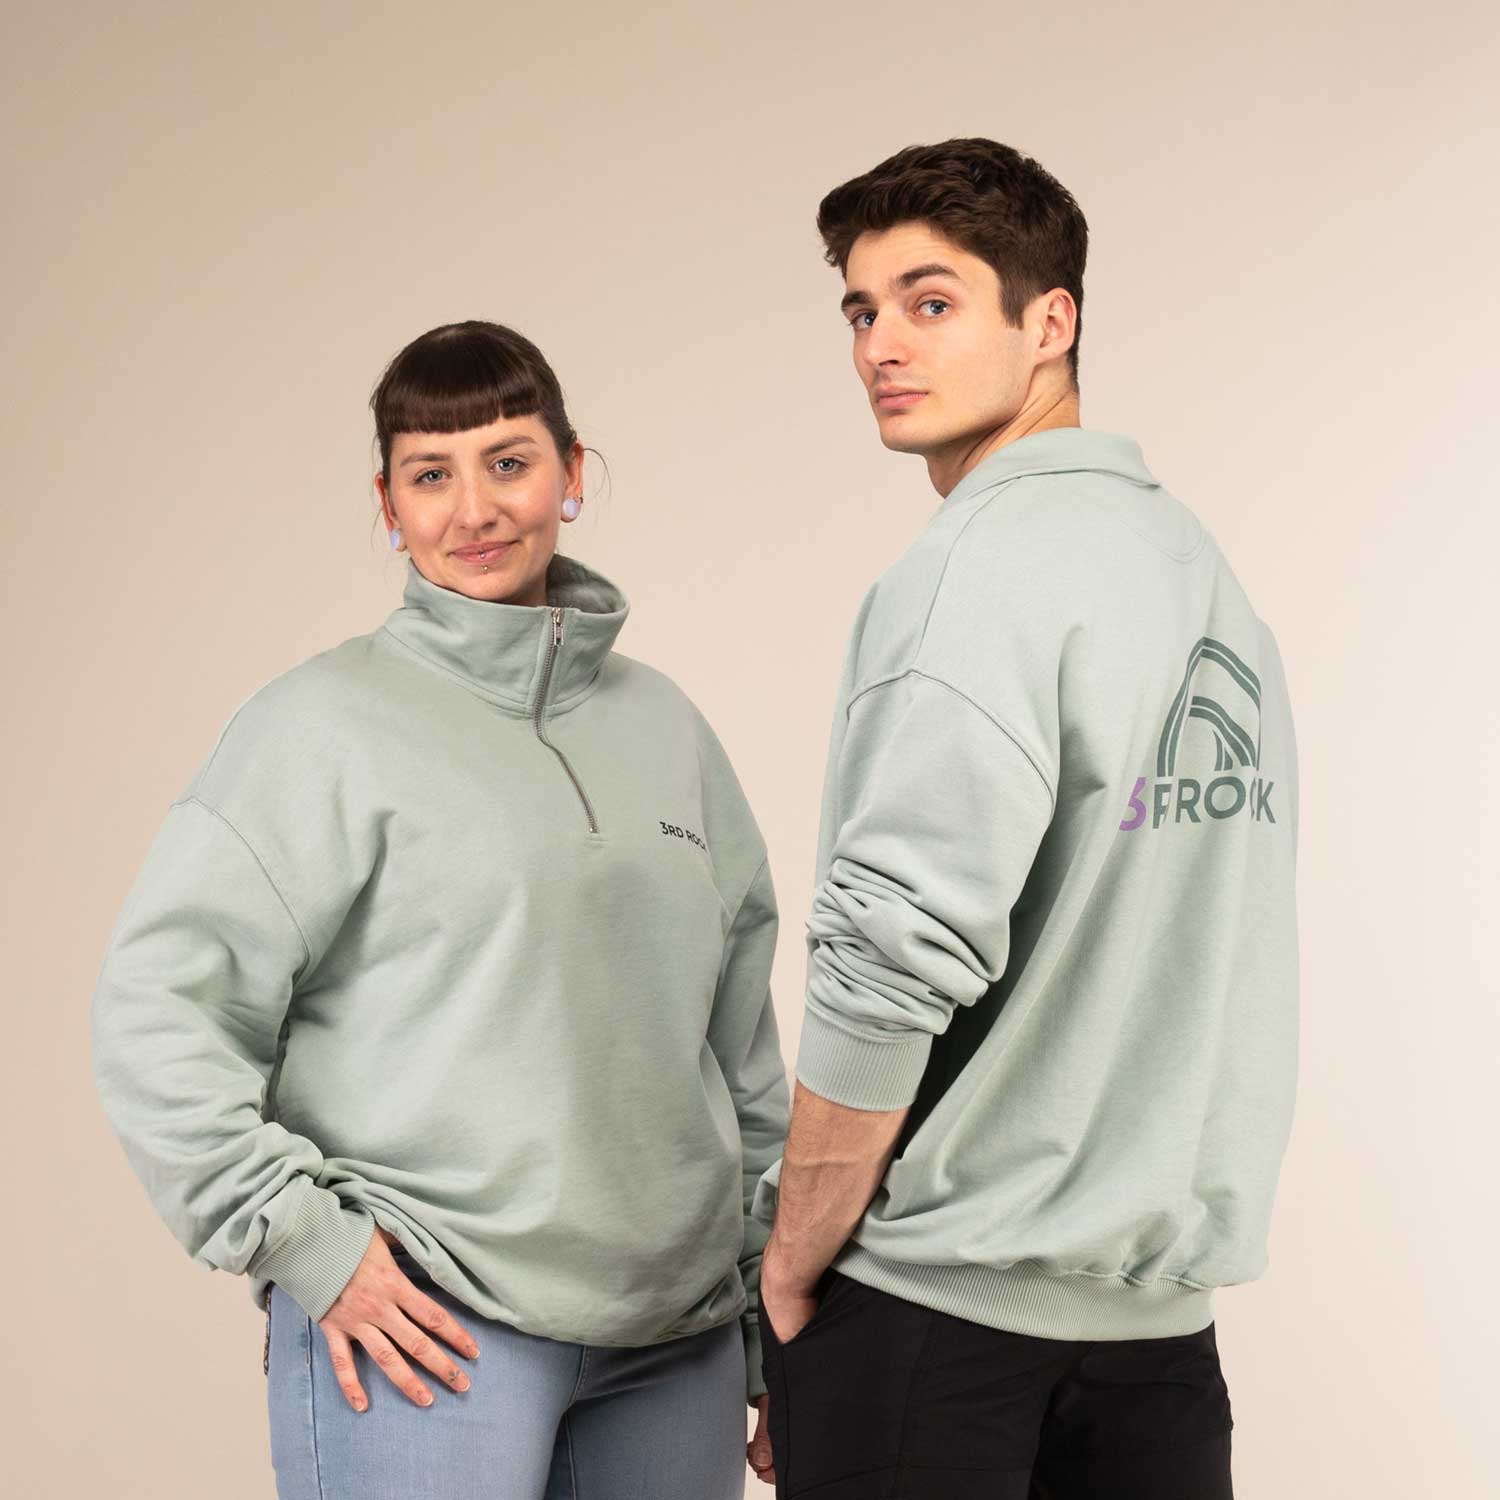 GERRY SWEATSHIRT |  Organic Zipped Sweatshirt | 3RD ROCK Clothing -  Laura is 5ft 6 with a 36" bust and wears a size M. Billy is 5ft 11 with a 41" bust and wears a size L